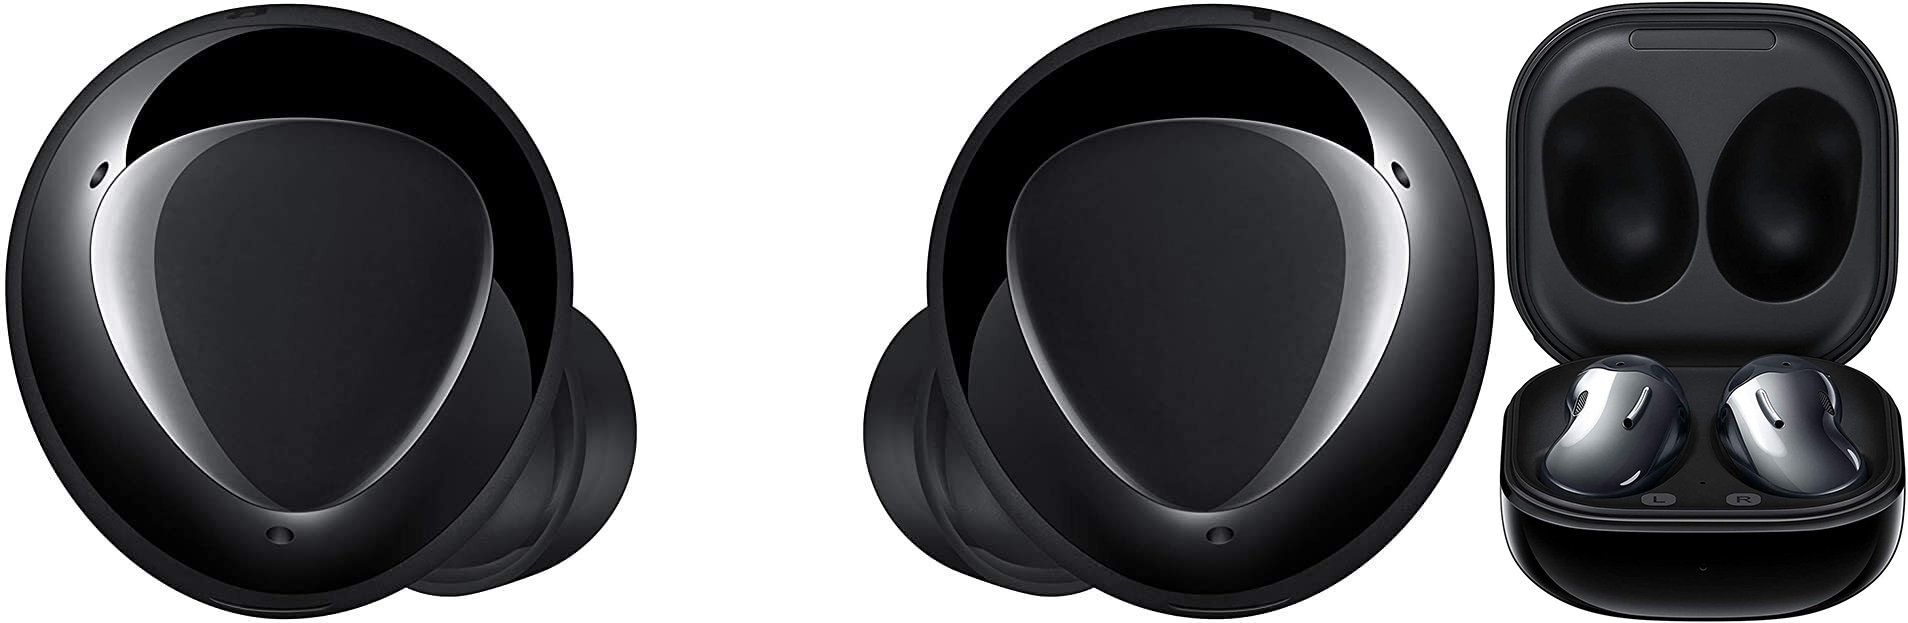 Act fast! These Samsung Galaxy Buds Prime Day offers will be gone later today